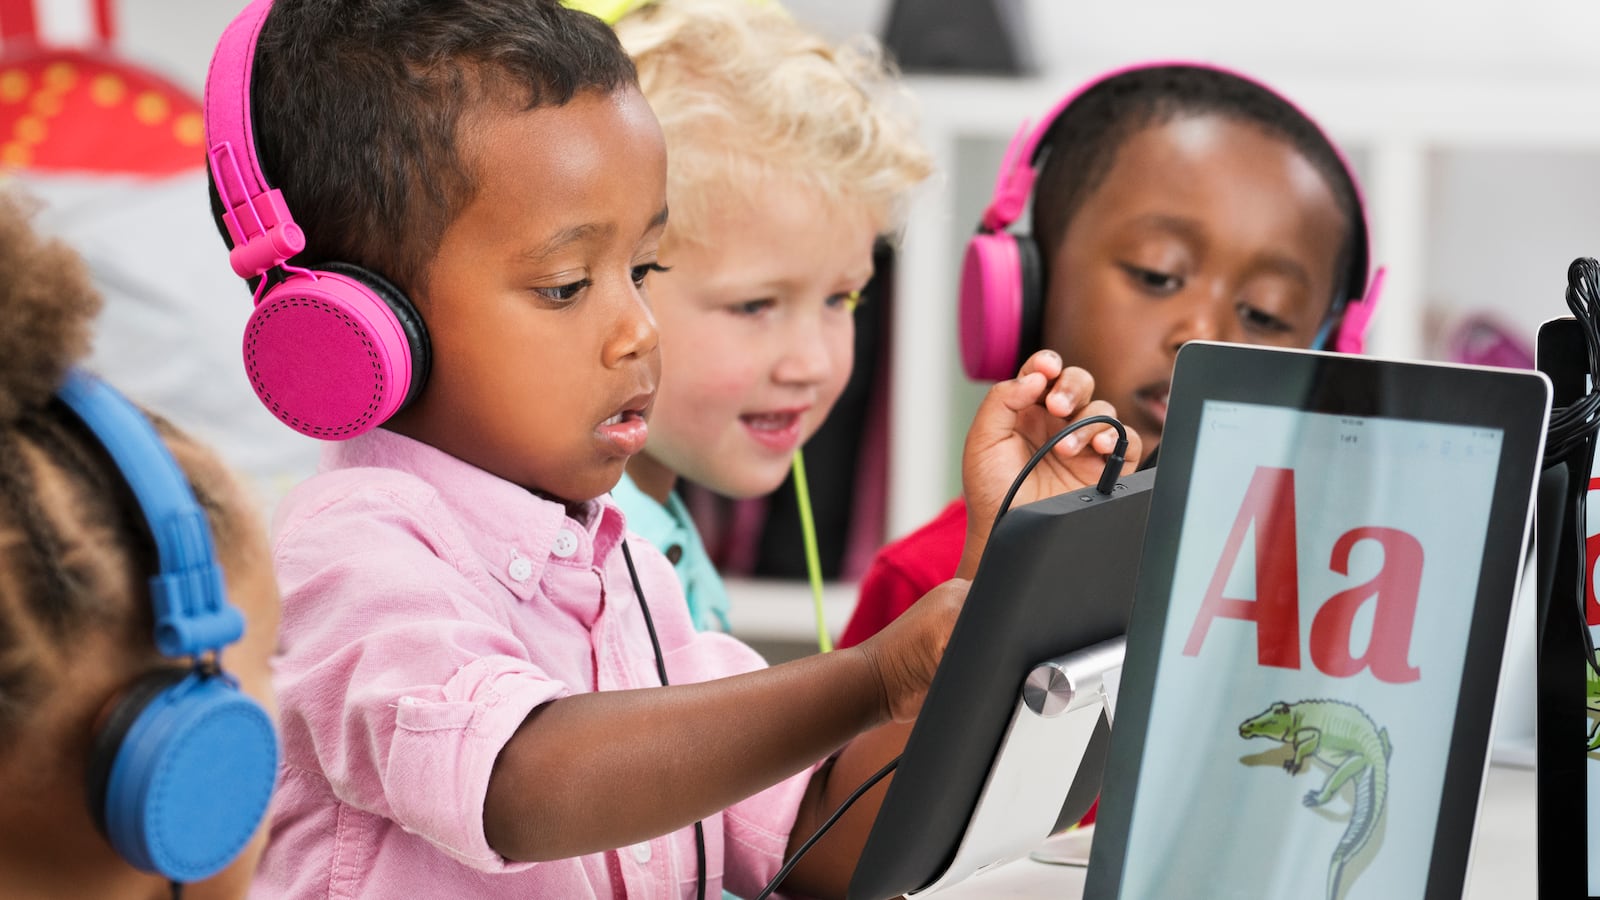 Students learning alphabet with digital tablets (Ariel Skelley | Getty Images)